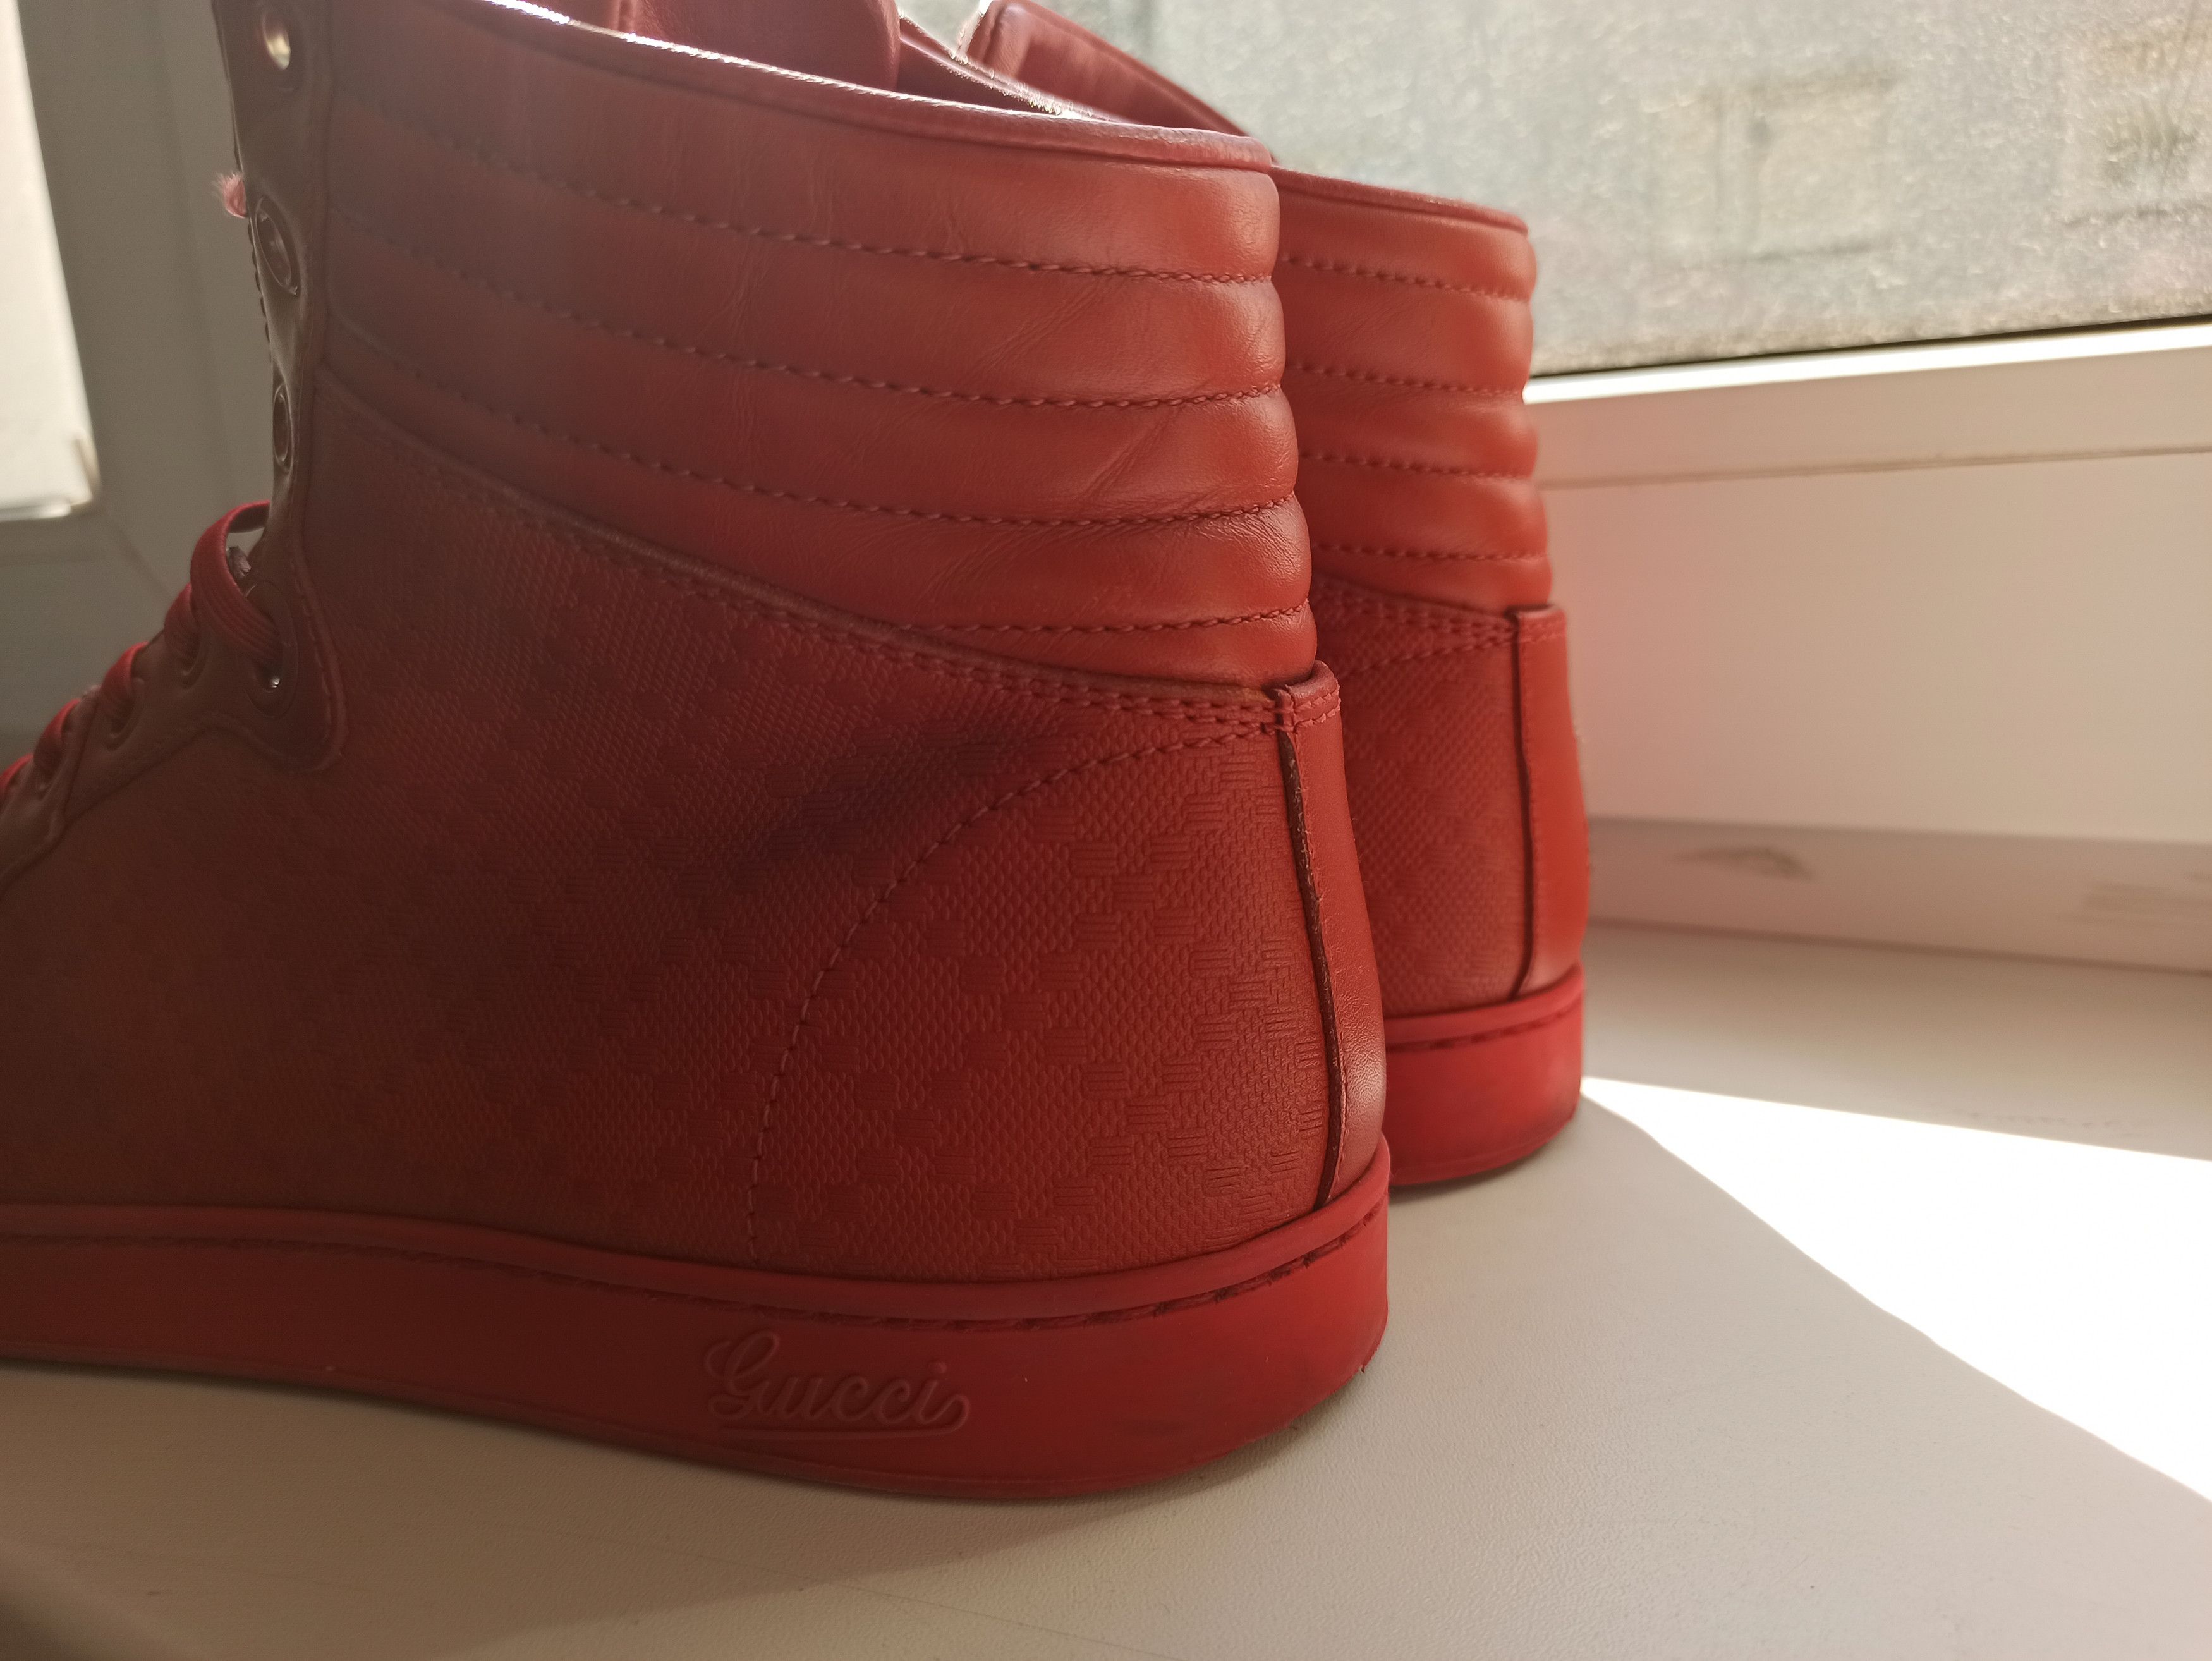 Gucci Gucci Red Leather Shoes Size US 9 / EU 42 - 3 Thumbnail